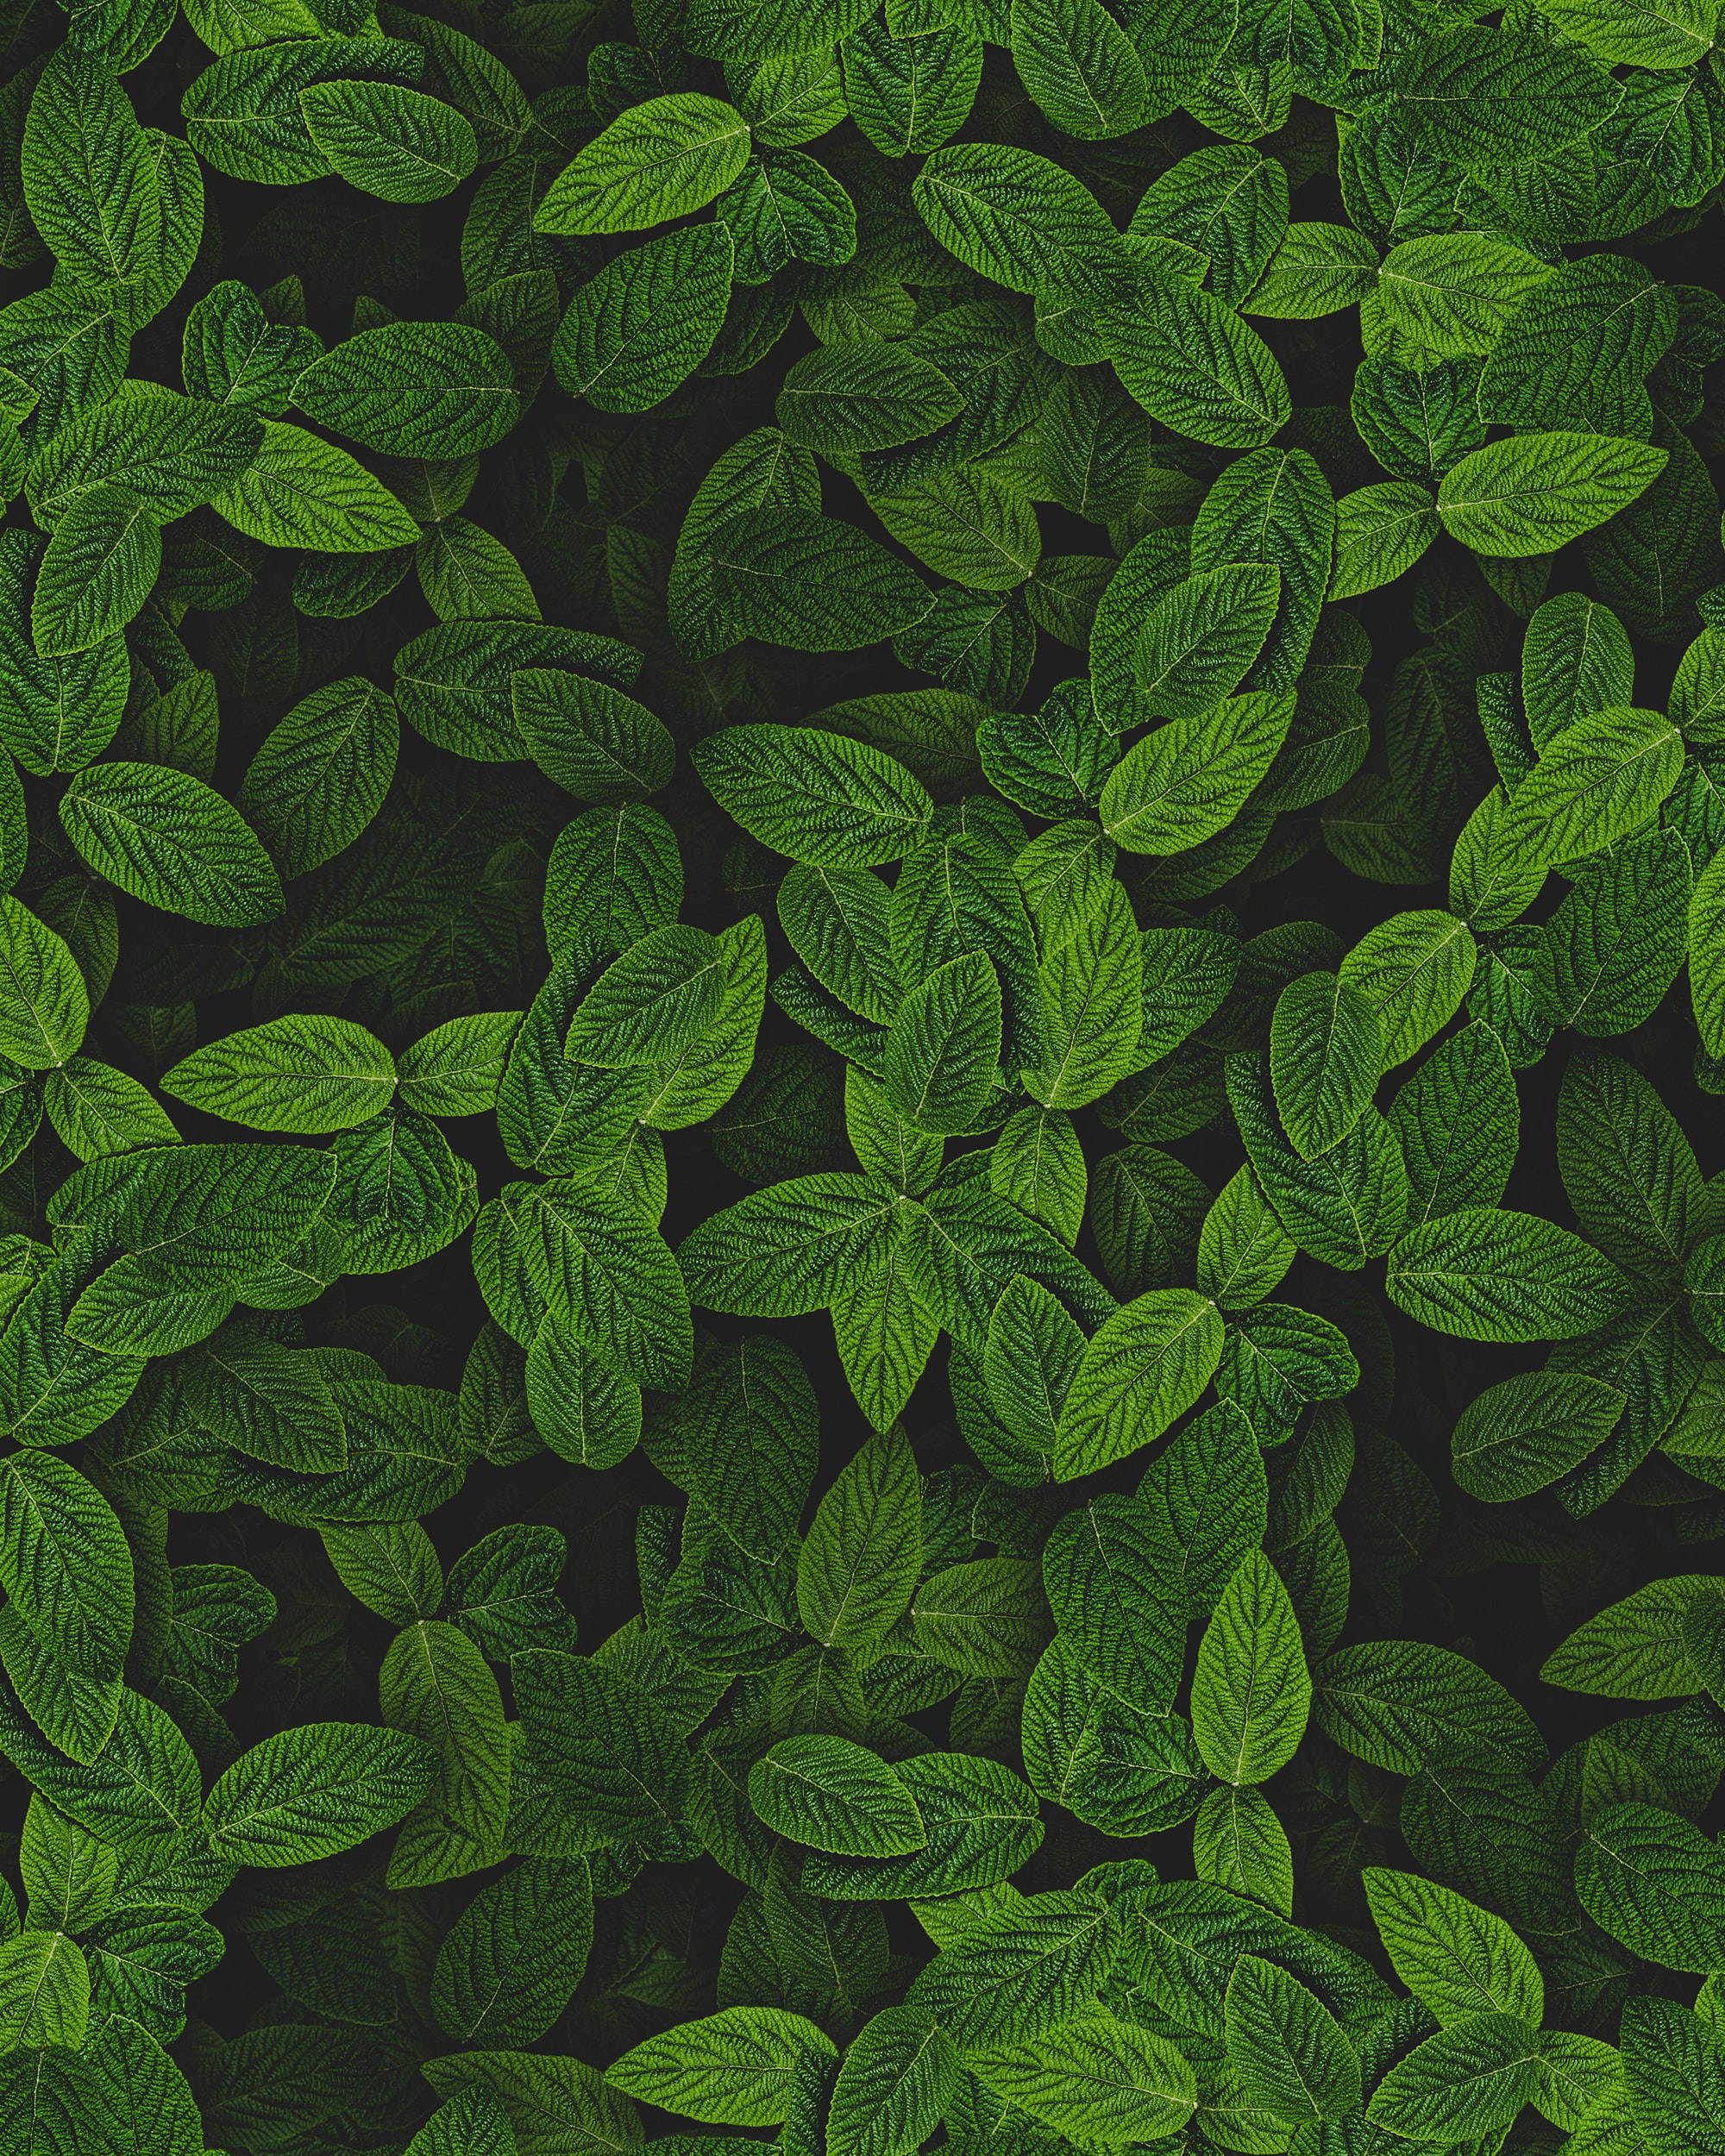 Free Leaves Background